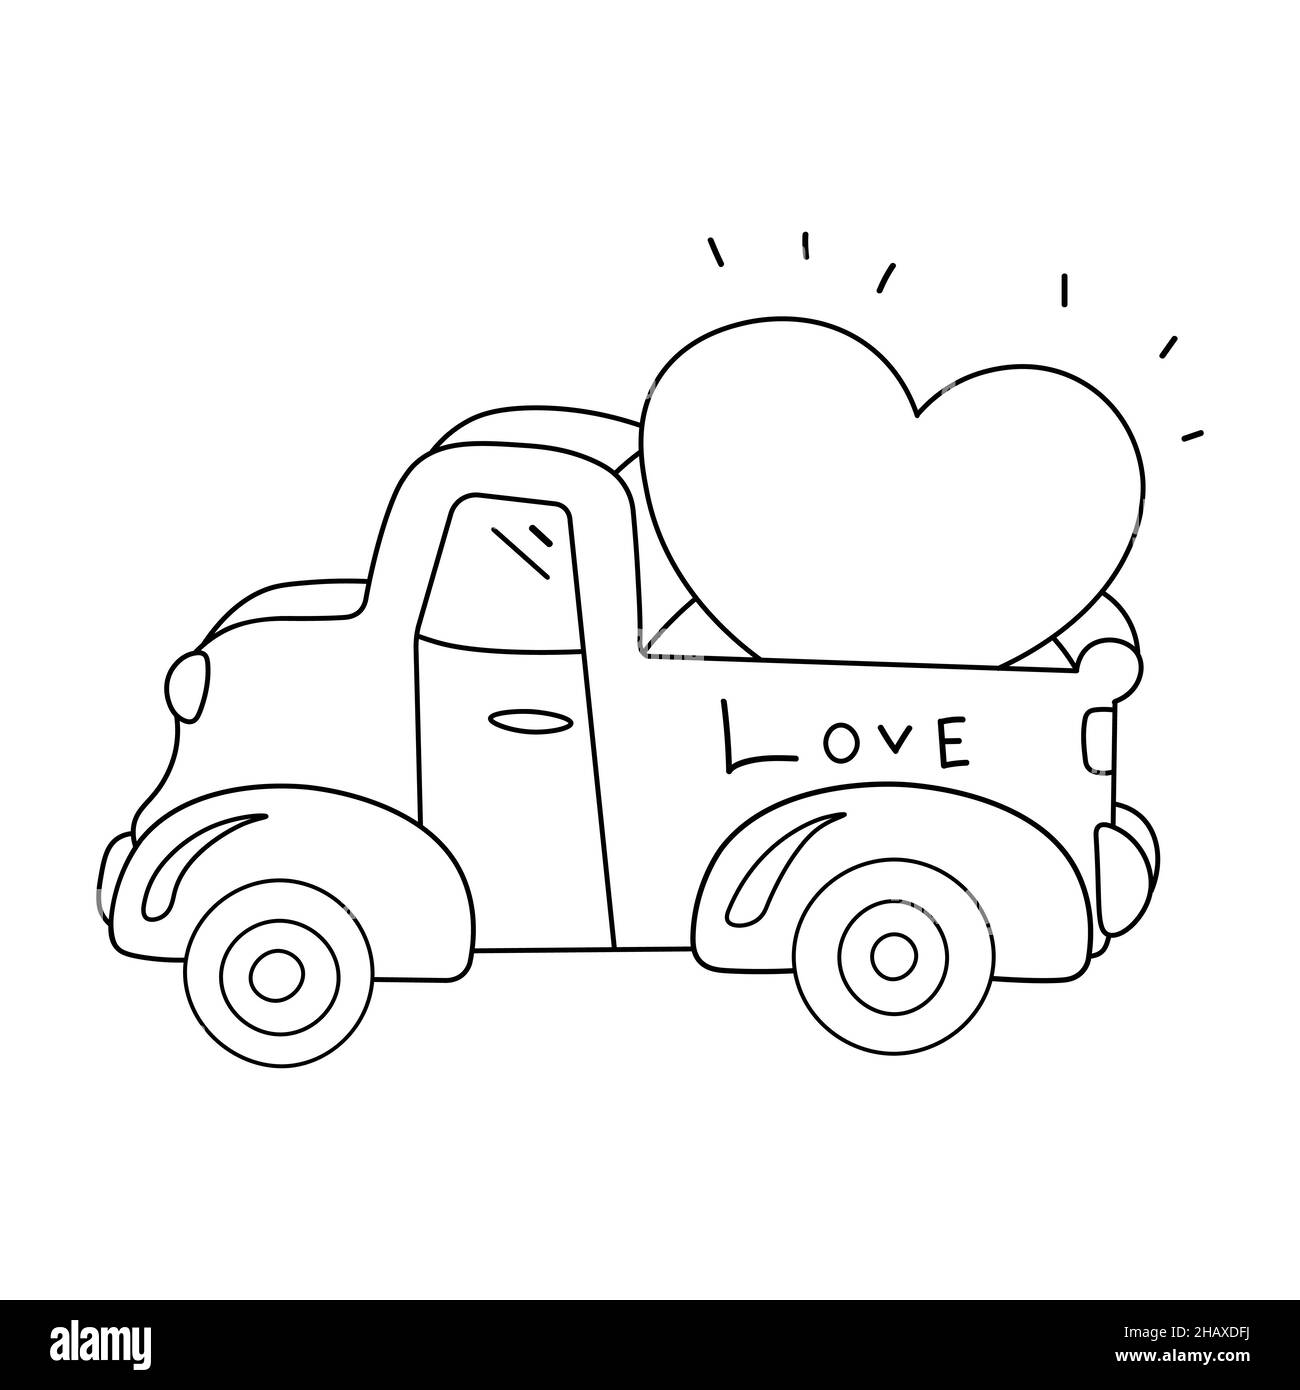 Greeting Card Valentine's Day with a car and Balloons Hearts. Cupid's Delivery. Vector illustration in doodle style isolated on background. Love truck Stock Vector